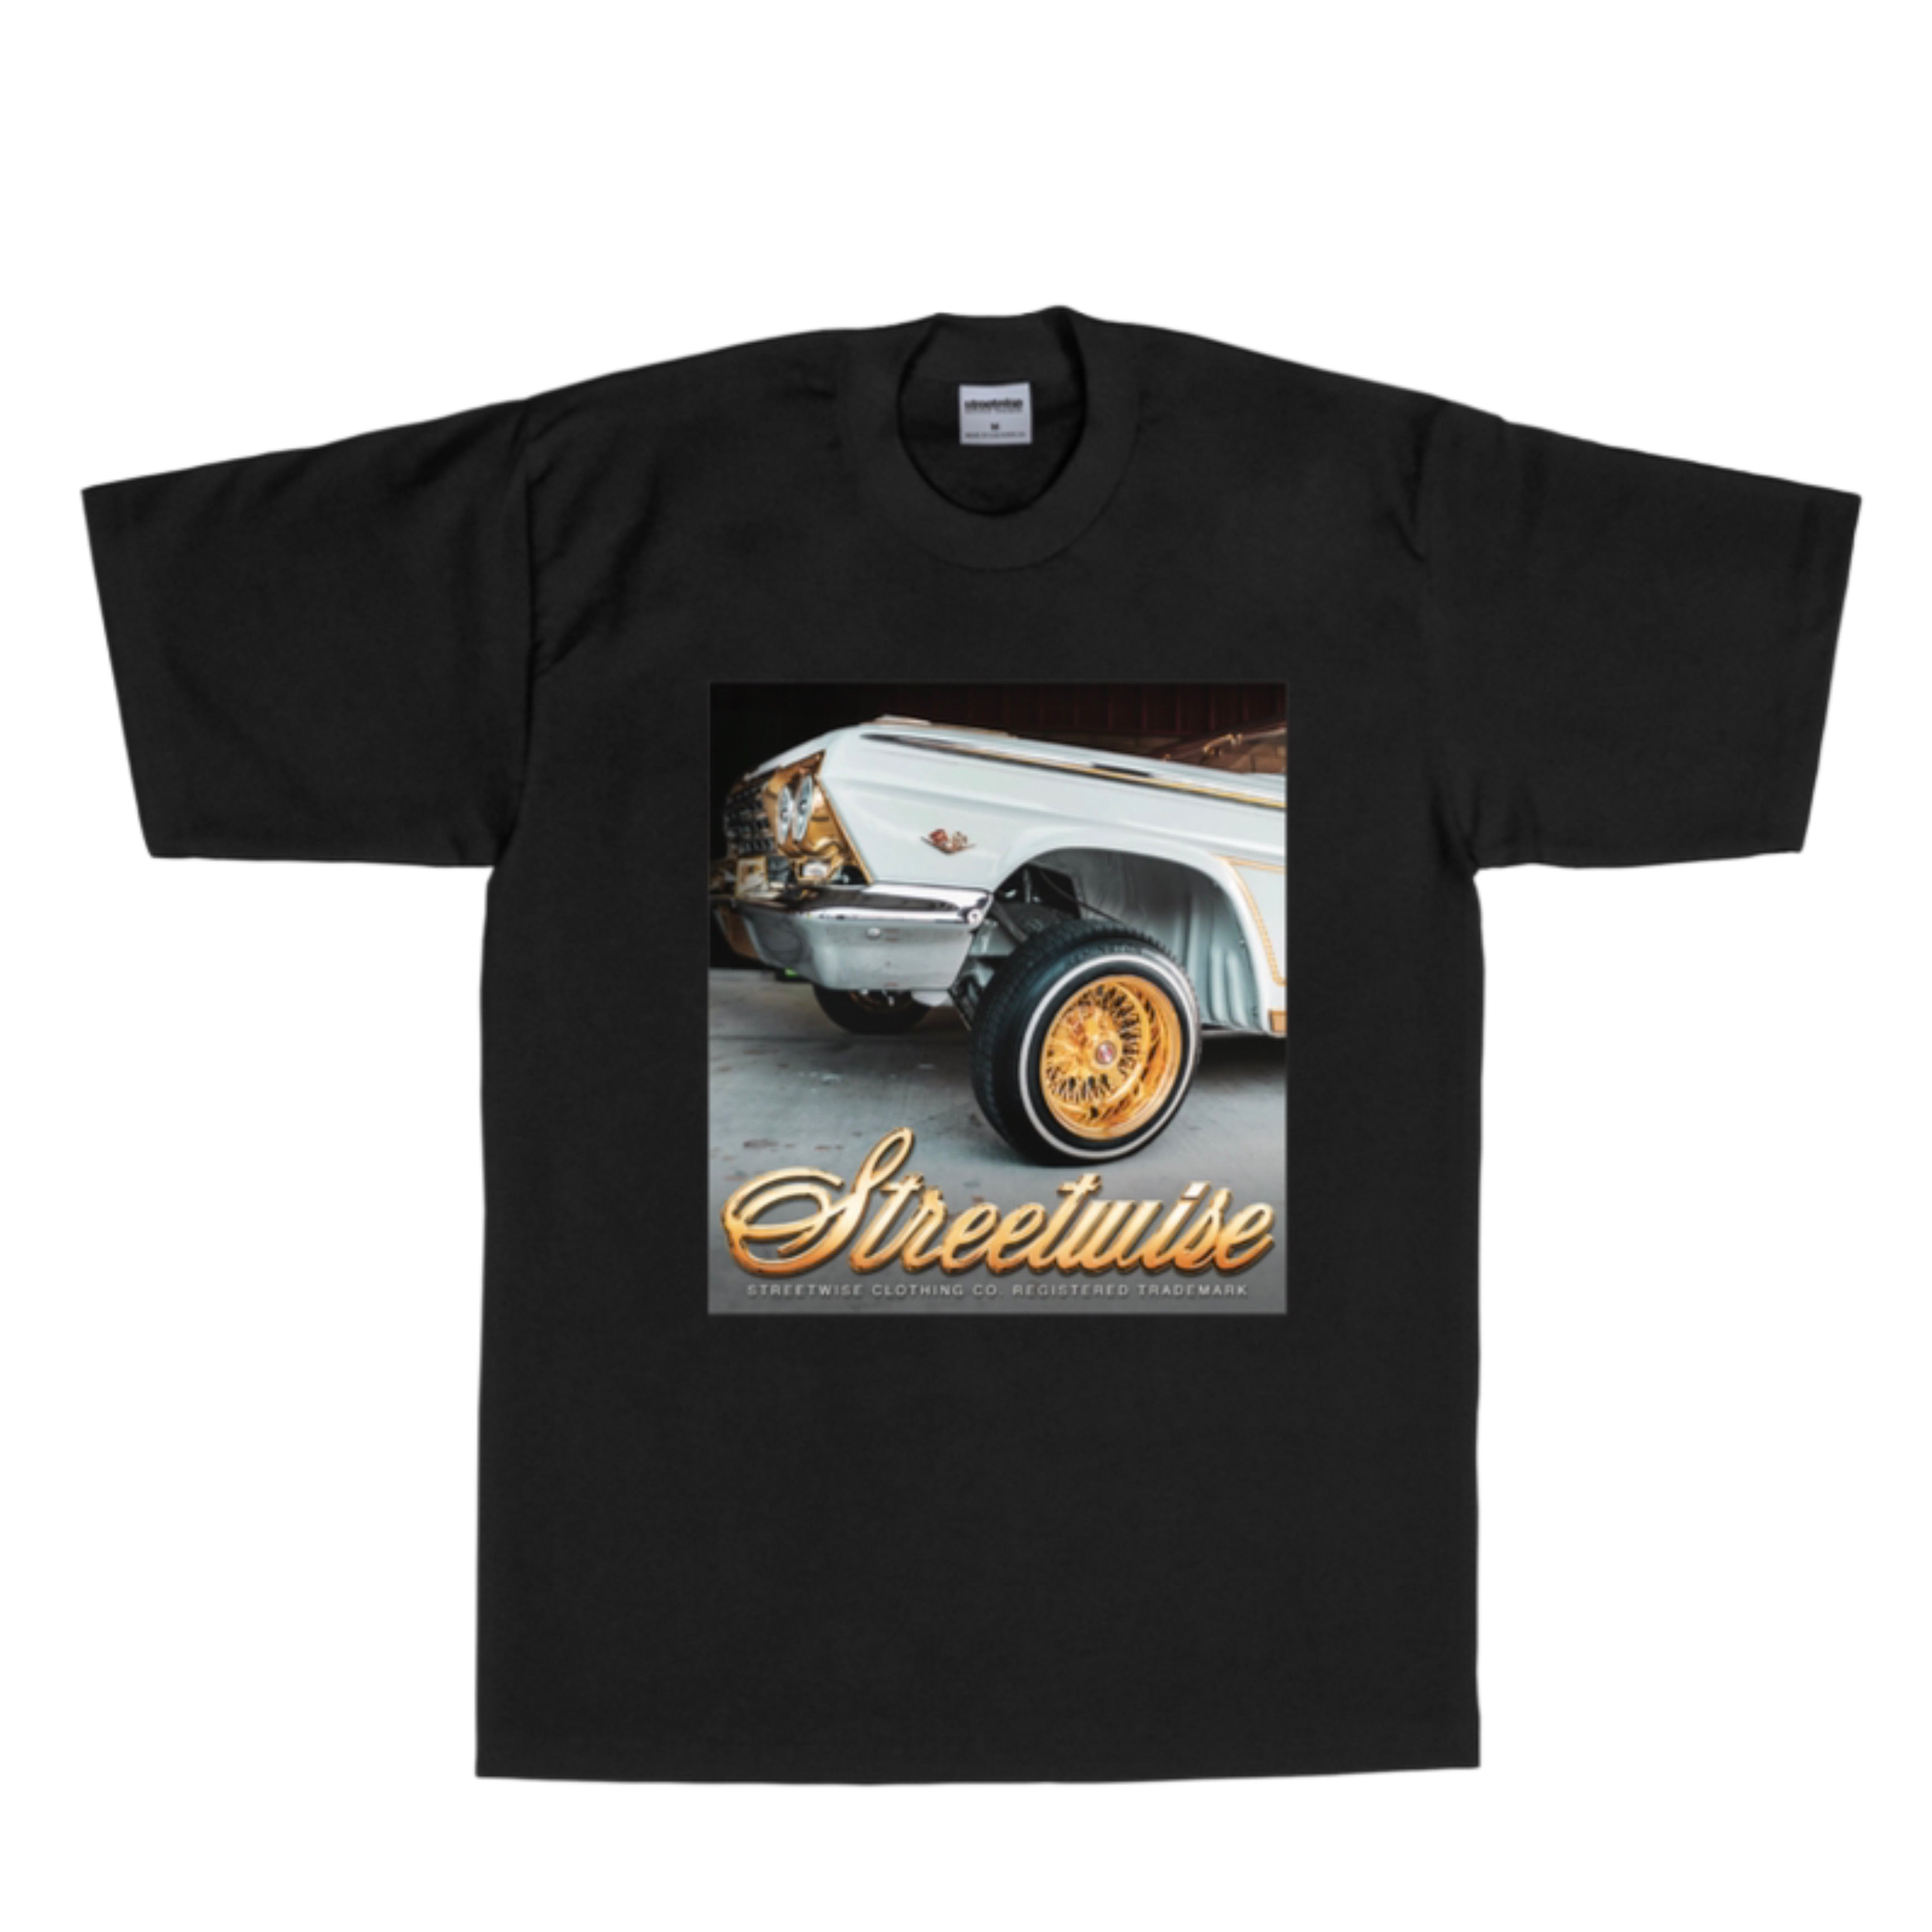 Streetwise GOLD 62 T-Shirt